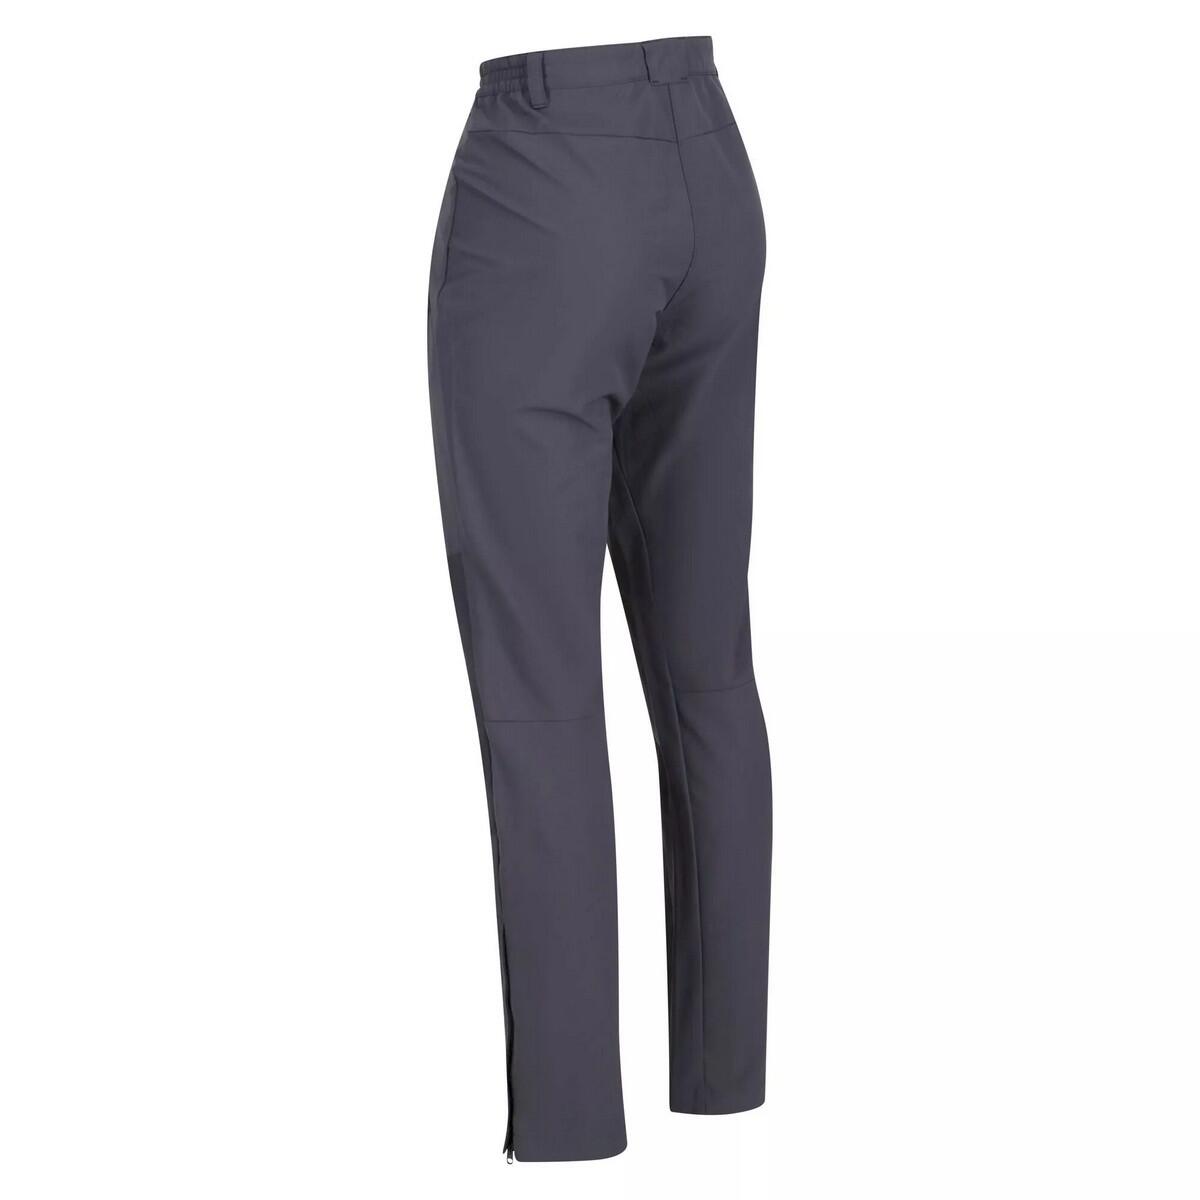 Womens/Ladies Questra IV Stretch Hiking Trousers (Seal Grey) 4/5